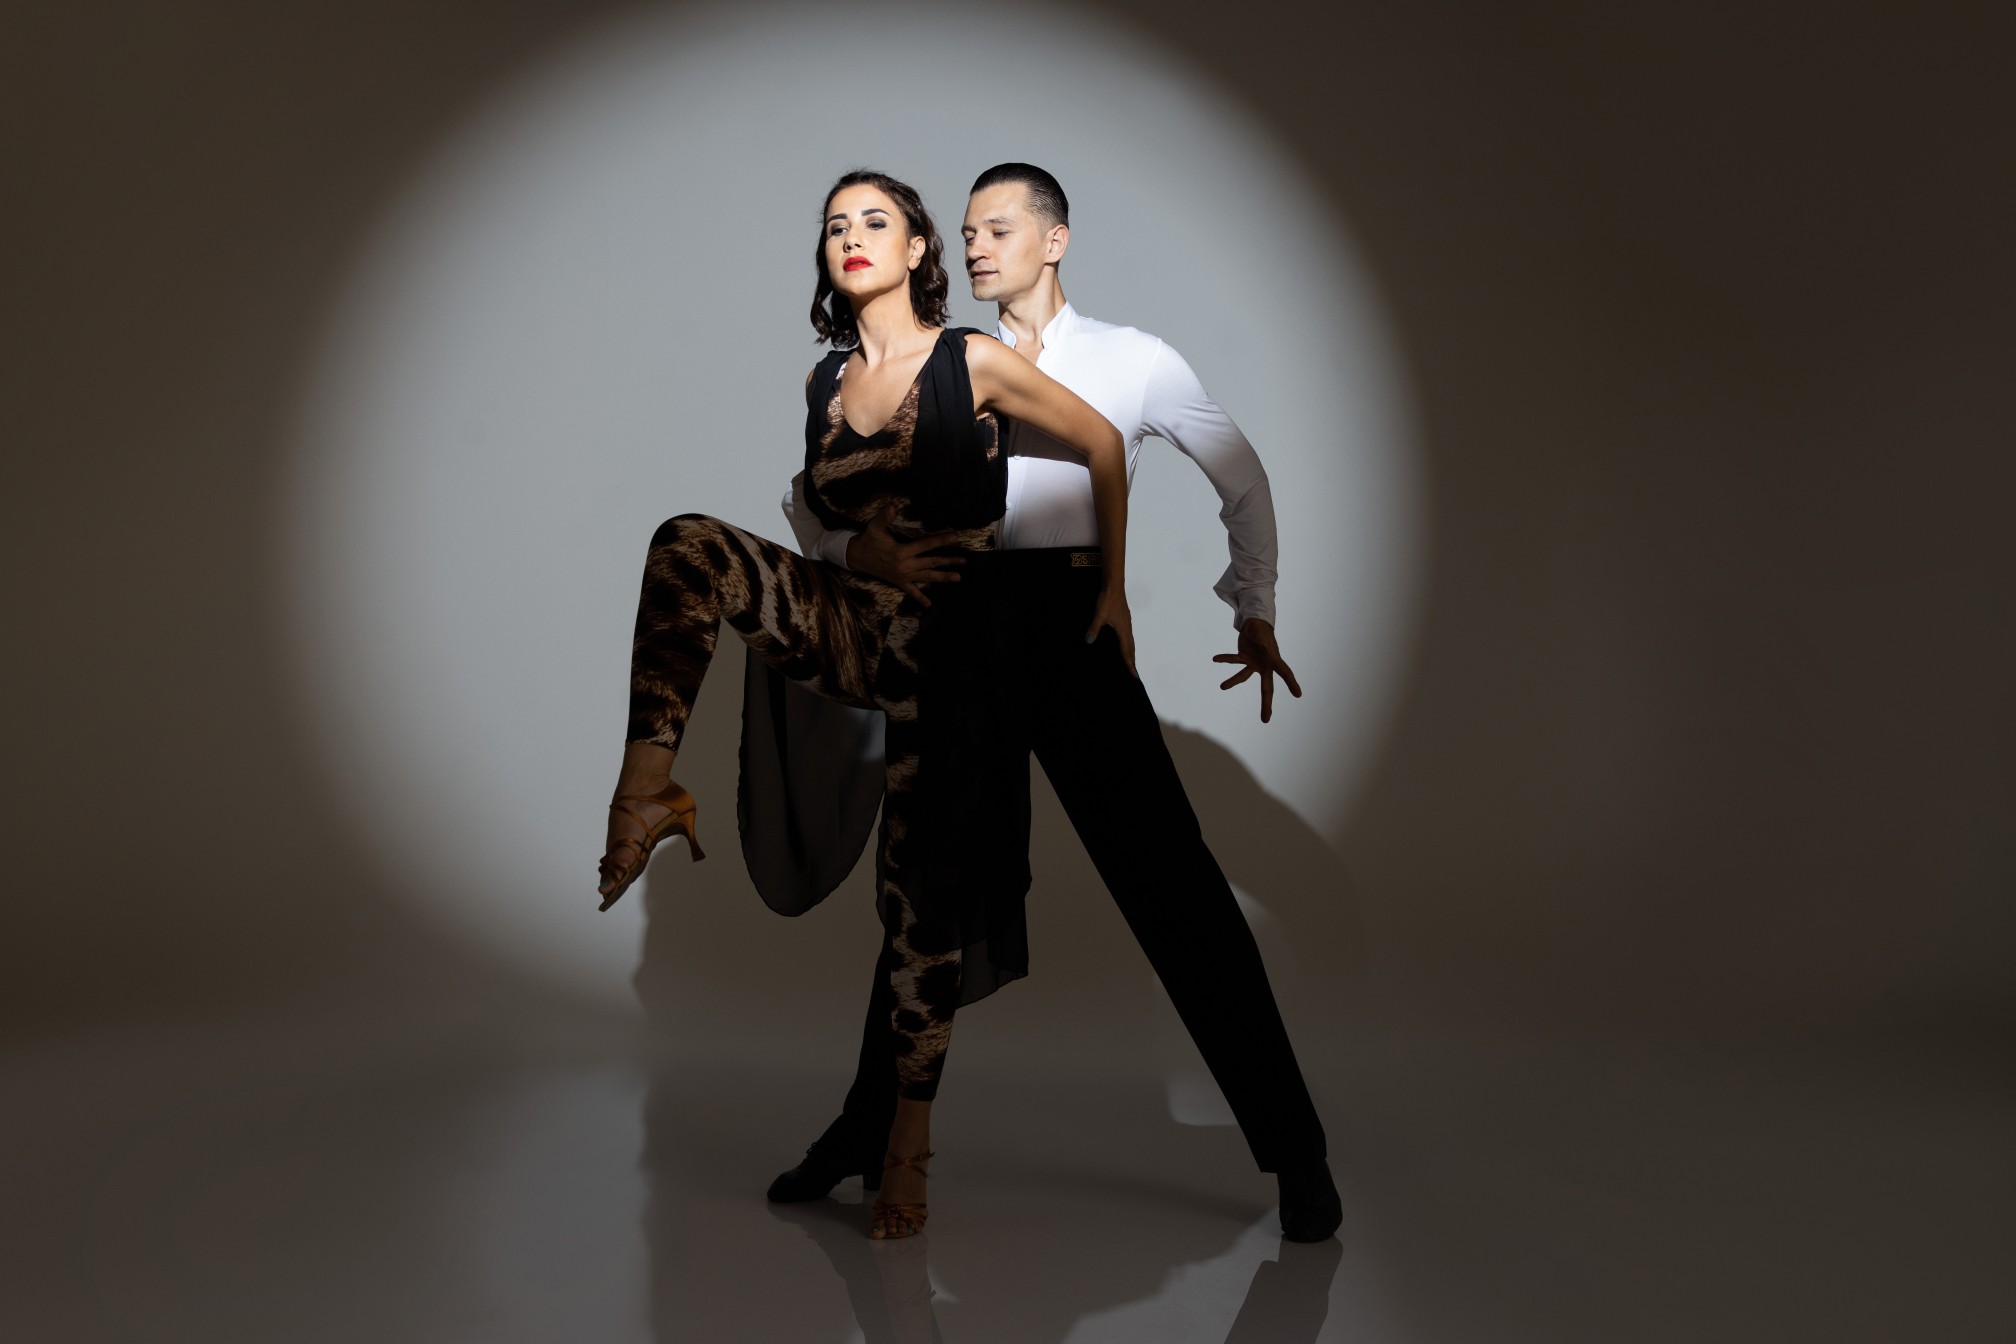 How Ballroom Dancing Can Supplement an Exercise Routine